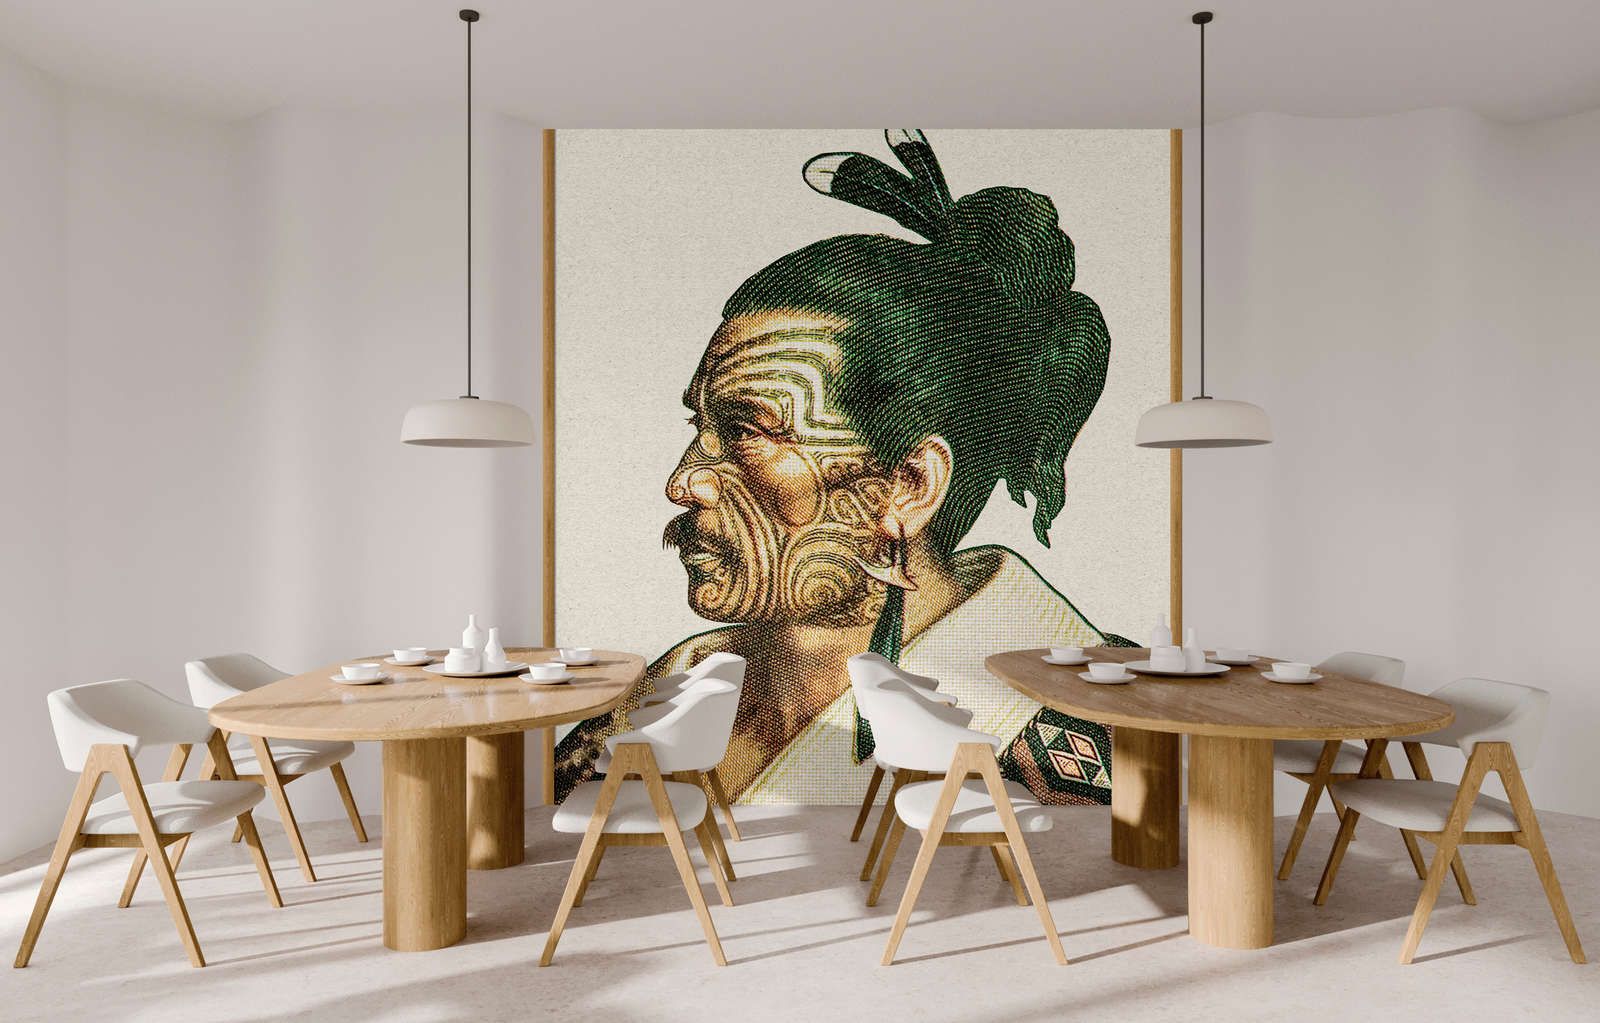             Photo wallpaper »horishi« - African portrait in pixel style with kraft paper texture - Smooth, slightly shiny premium non-woven fabric
        